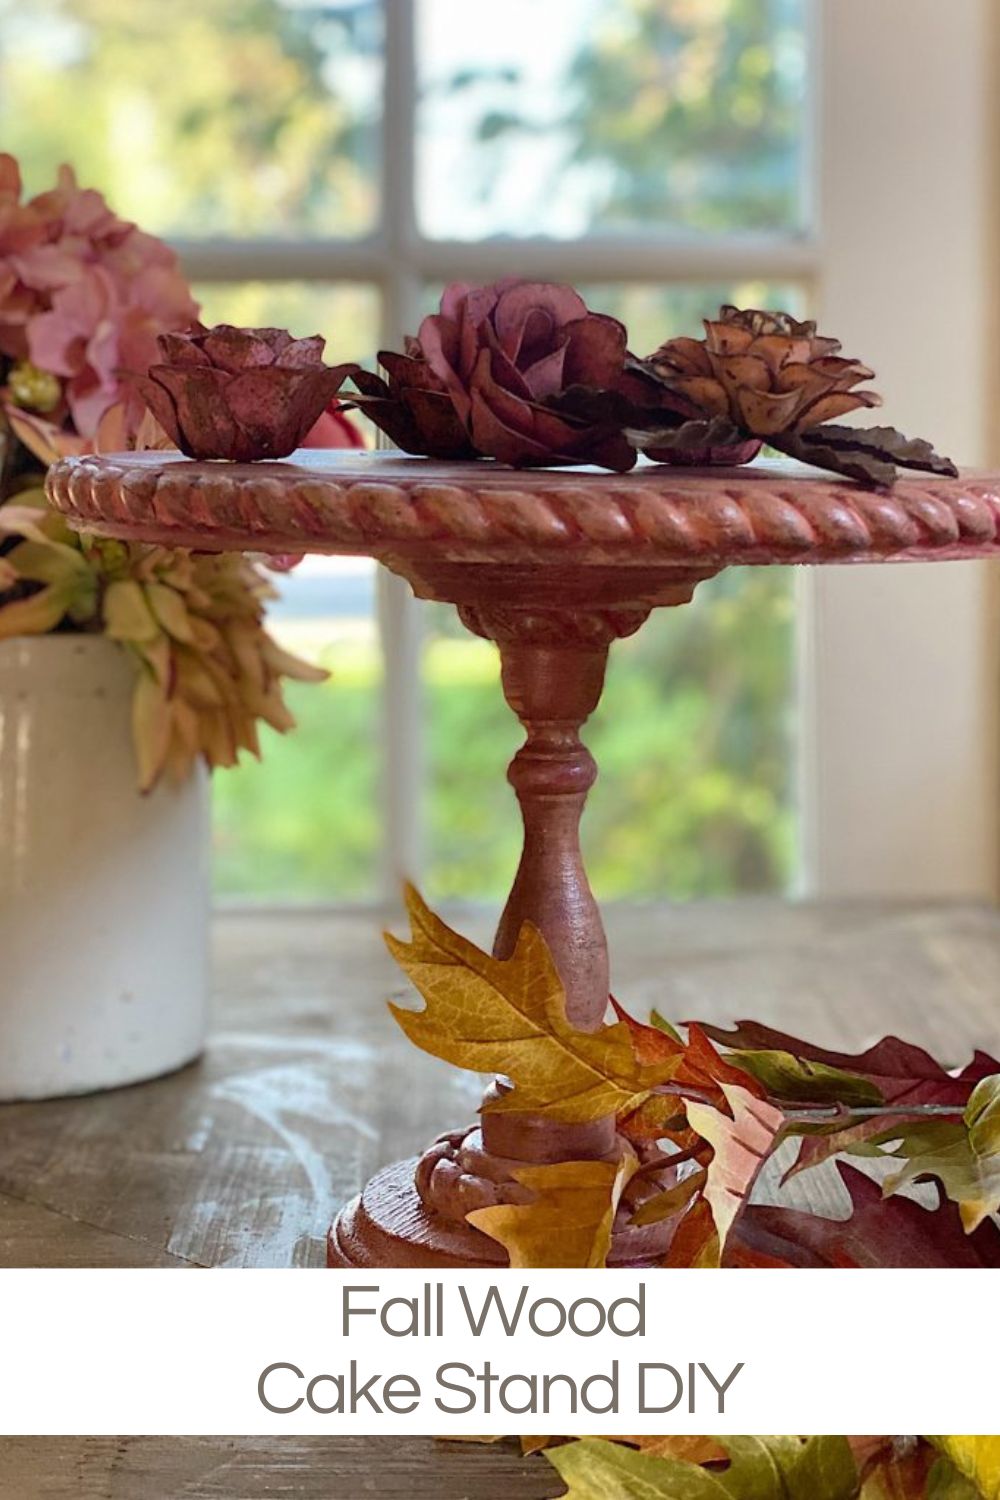 I have been busy making crafts for fall and I love this DIY - a fall wood cake stand. I chose to use fall colors (instead of white) and am so happy I did!